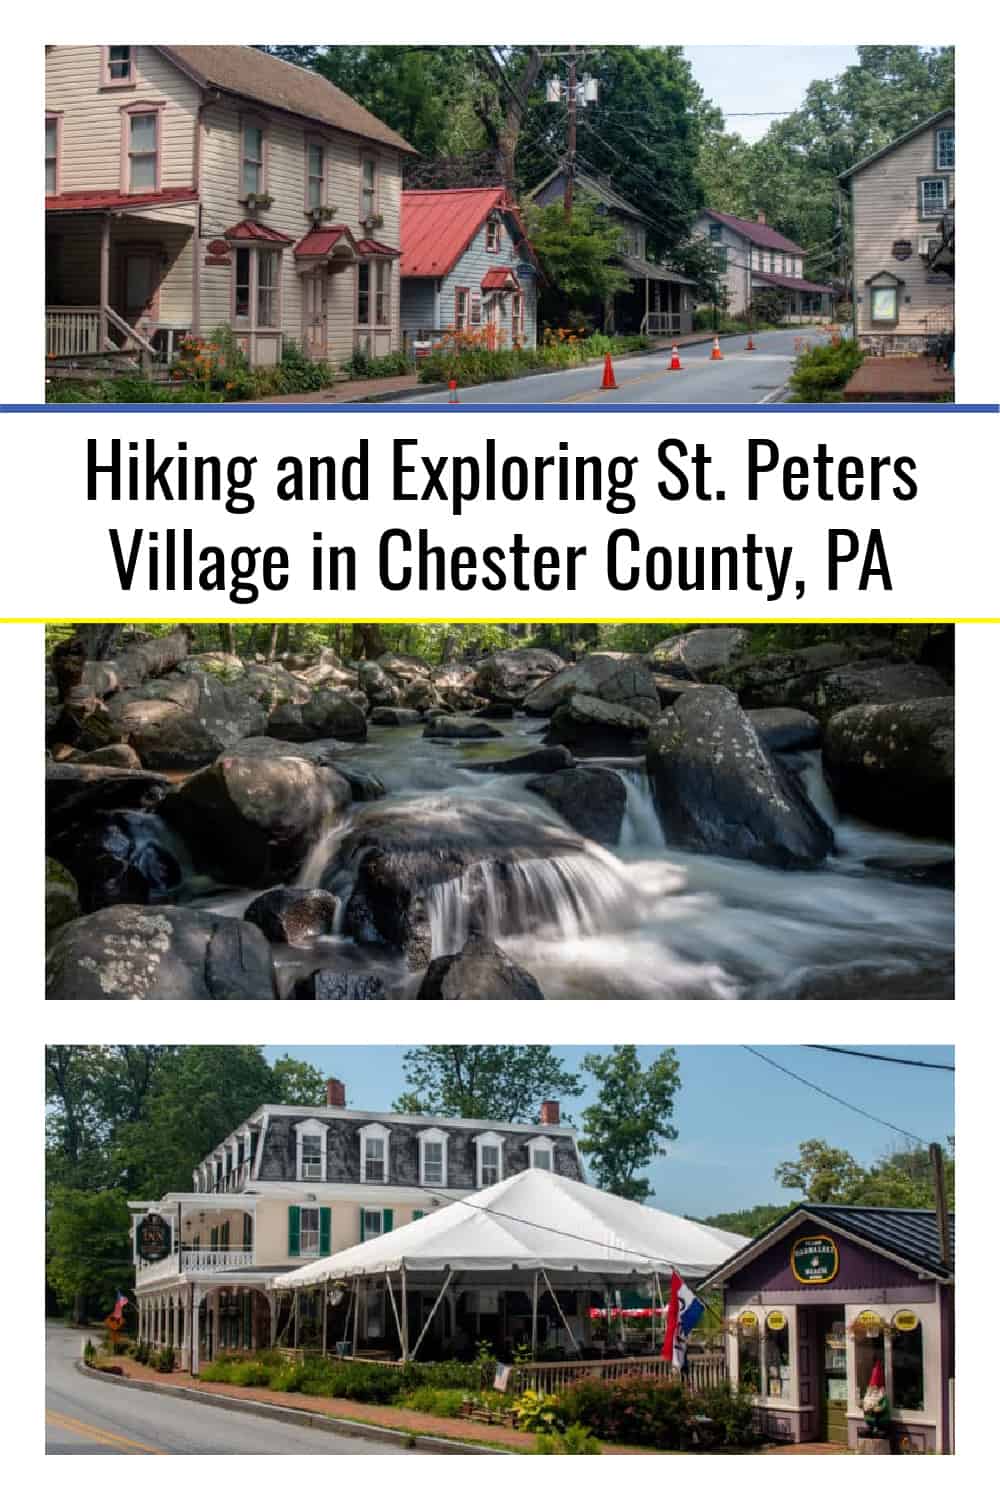 Hiking and Exploring St. Peters Village in Chester County, PA